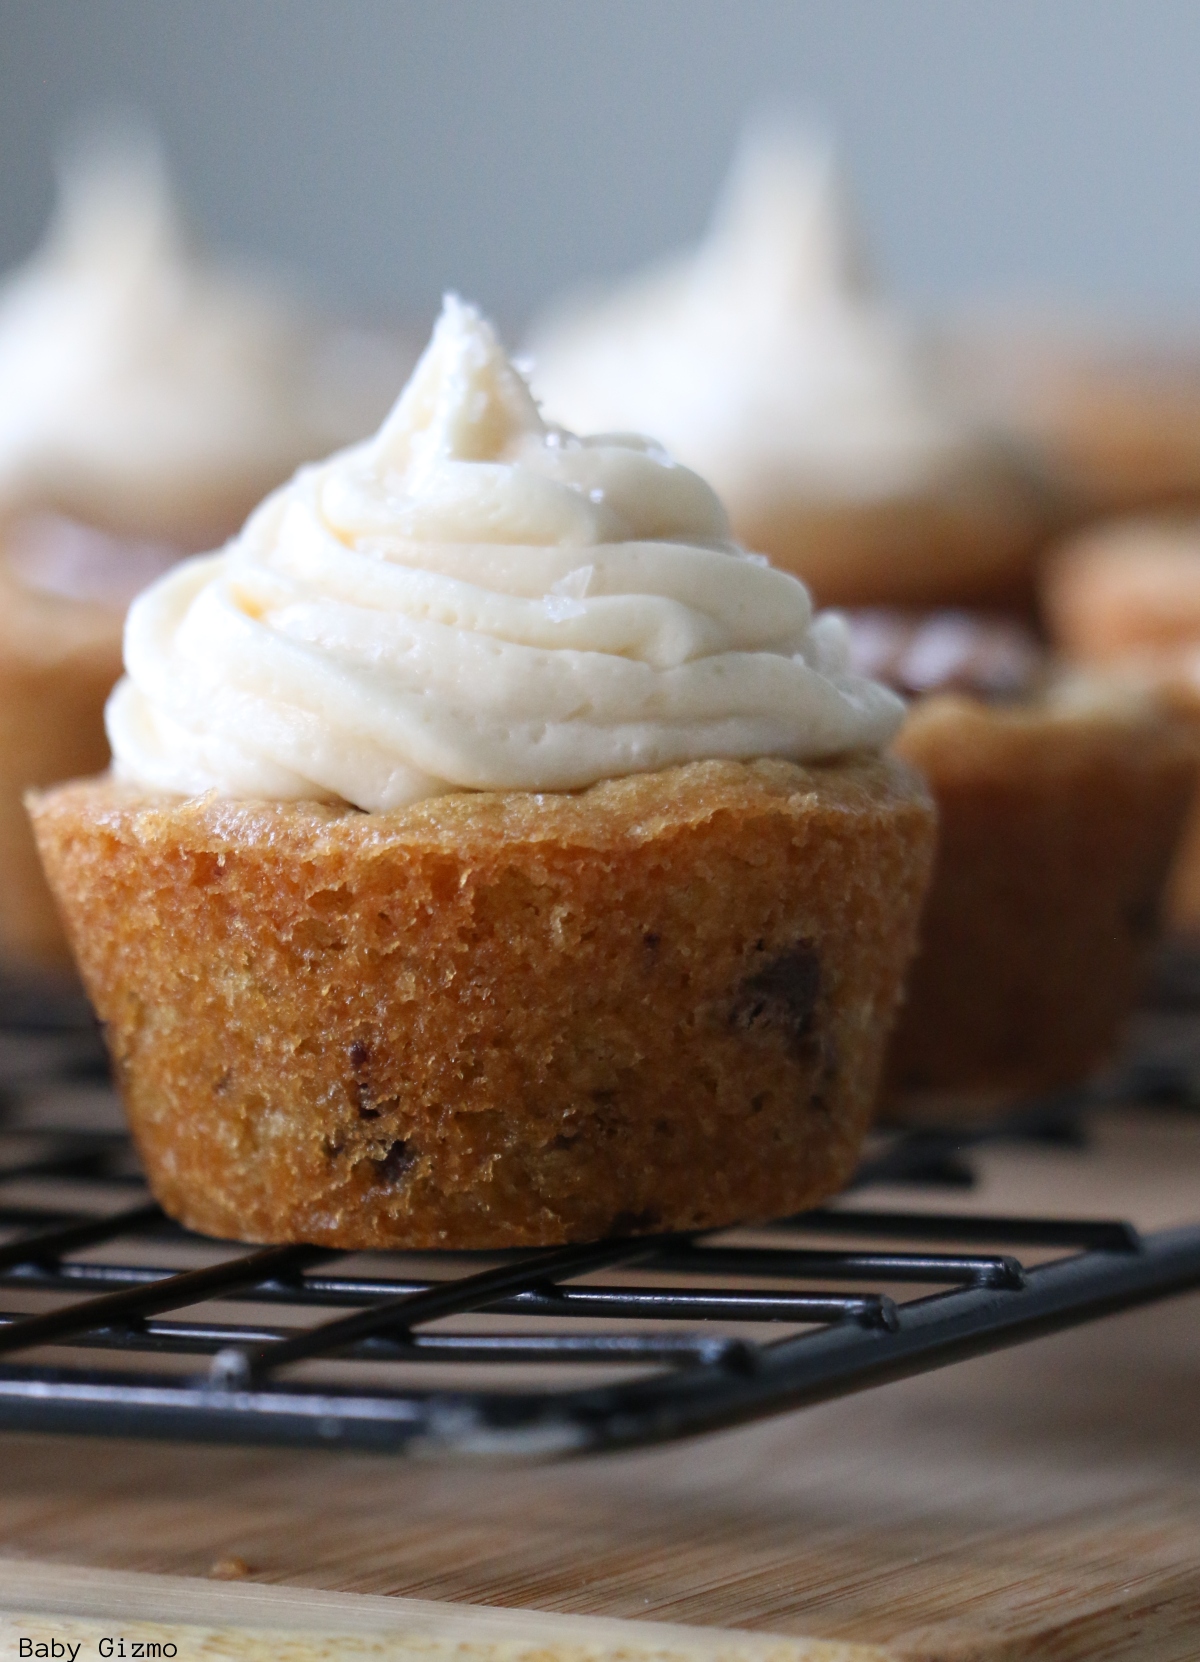 Snicker Cookie Cups with Frosting